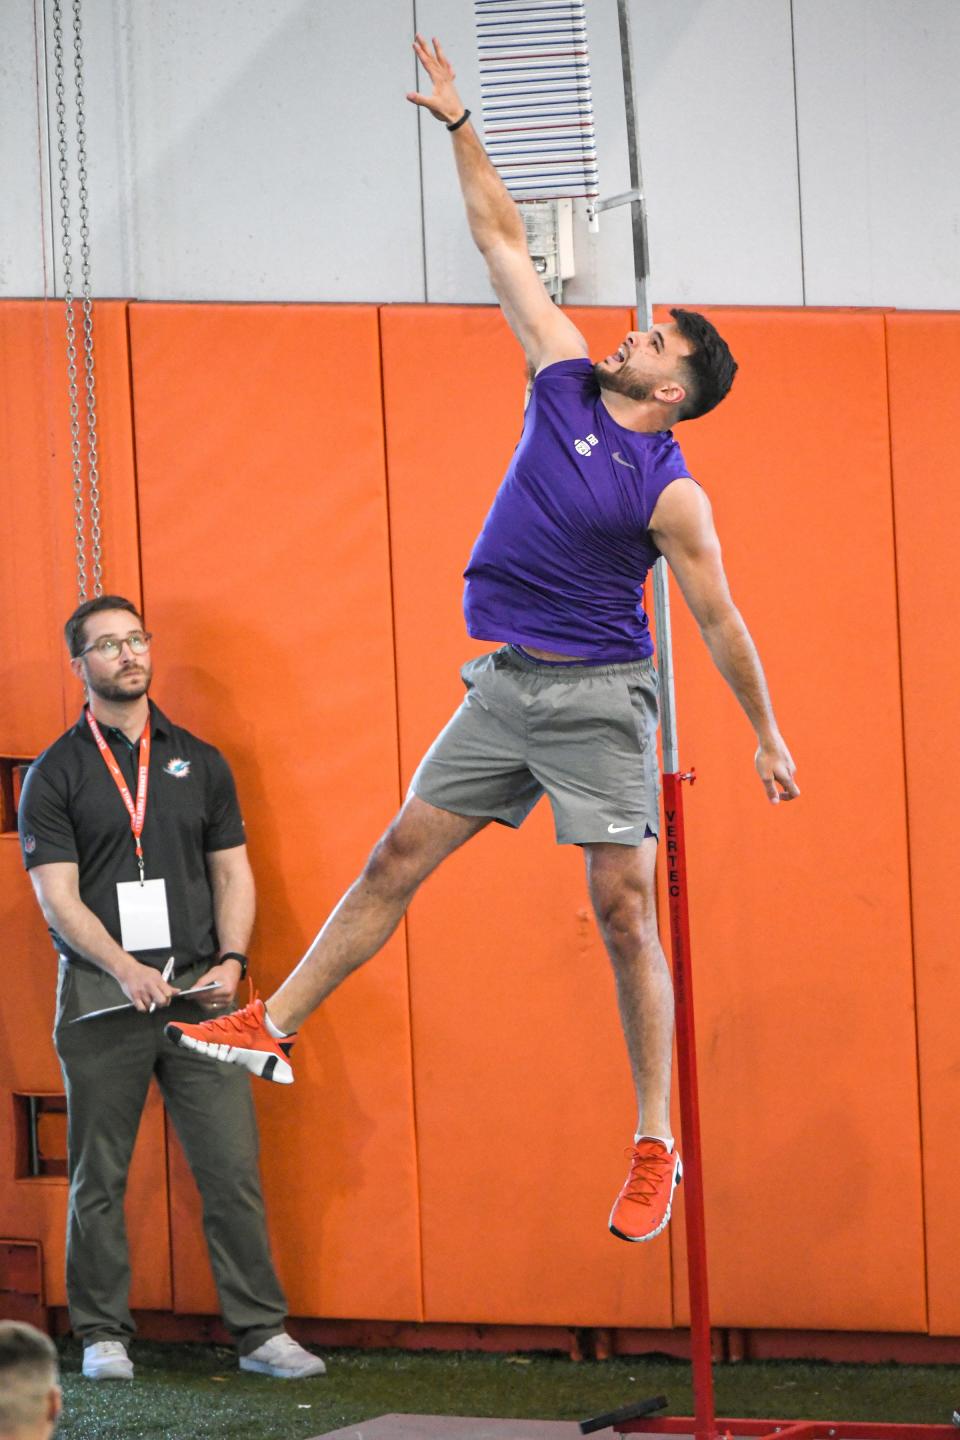 Nolan Turner, former Clemson safety, reaches a 37.5 inch vertical jump, the highest in the Clemson group, during Clemson Football Pro Day at the Poe indoor football facility in Clemson, S.C. Thursday, March 17, 2022. Players evaluated are considered by scouts of professional teams for the 2022 NFL Draft in Paradise, Nevada from April 28-30, 2022.